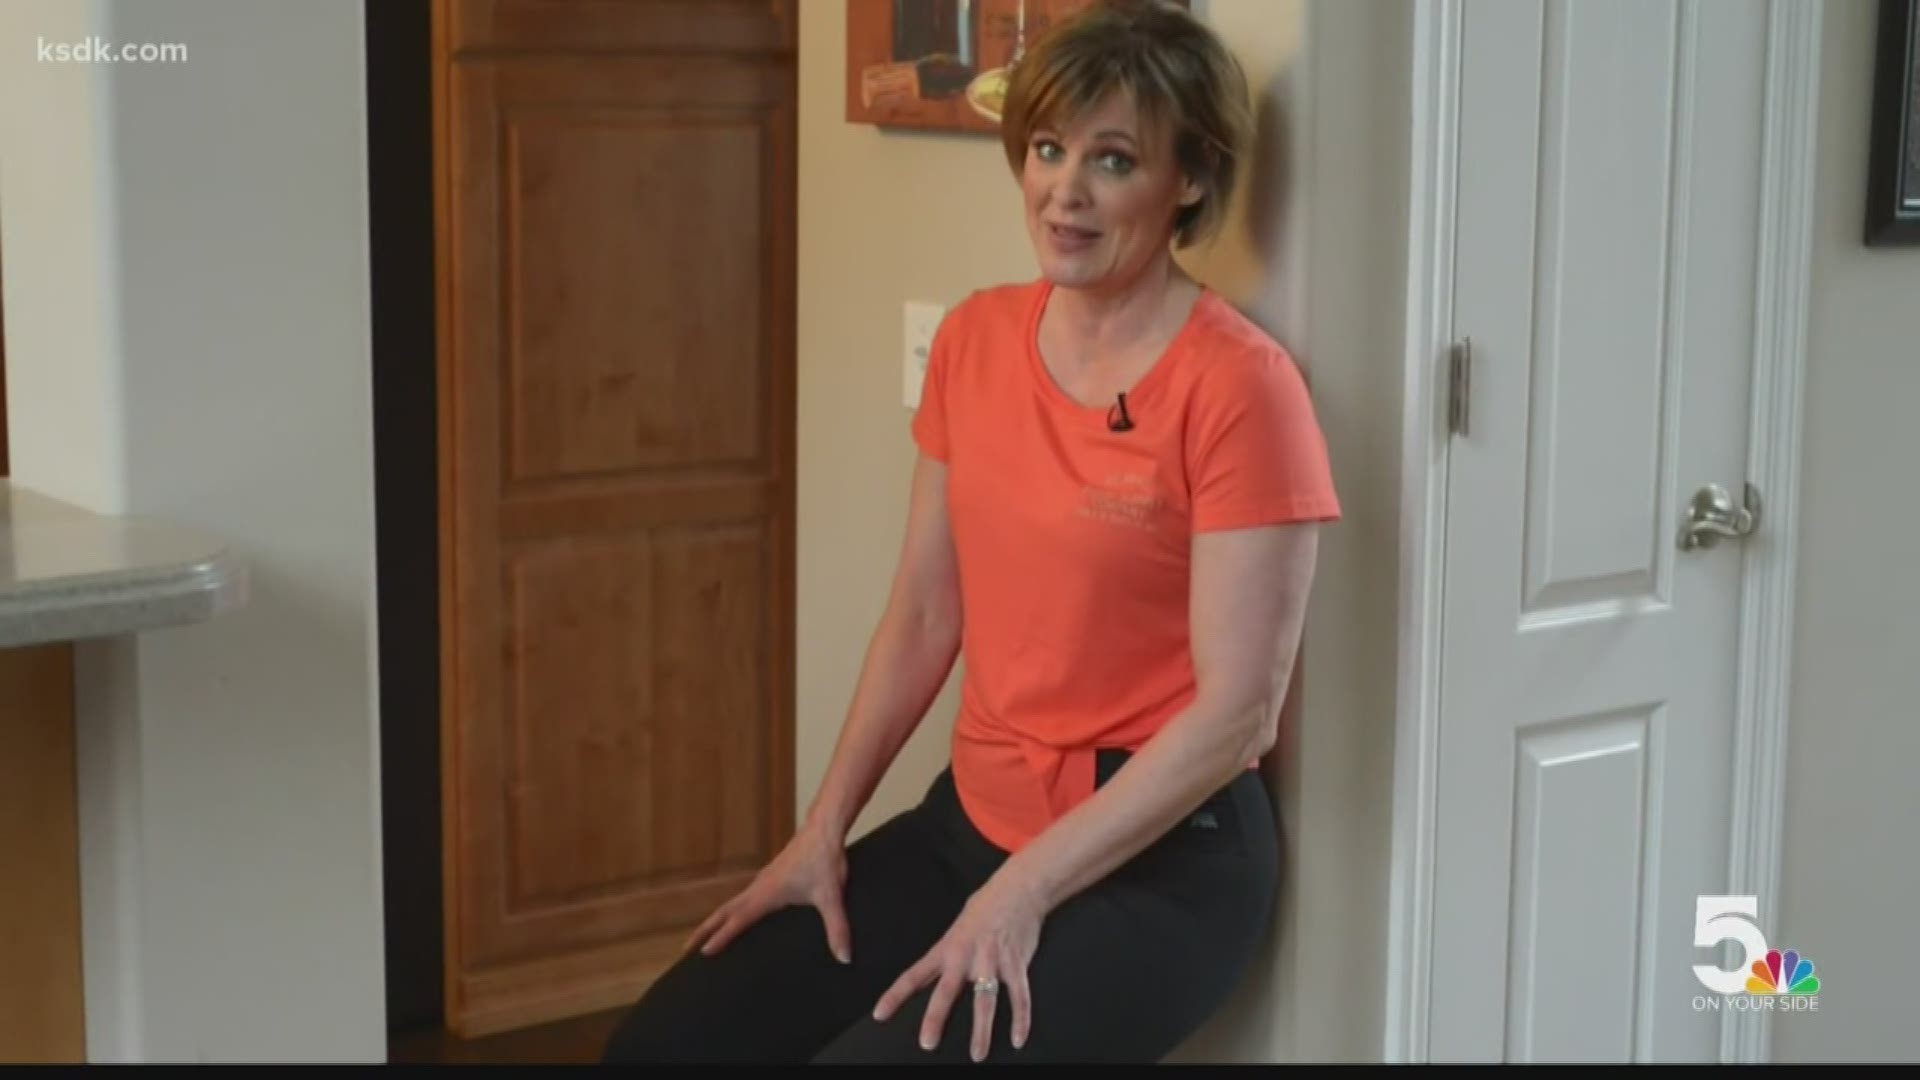 Monica Adams has a full-body workout you can do in your home in just seconds